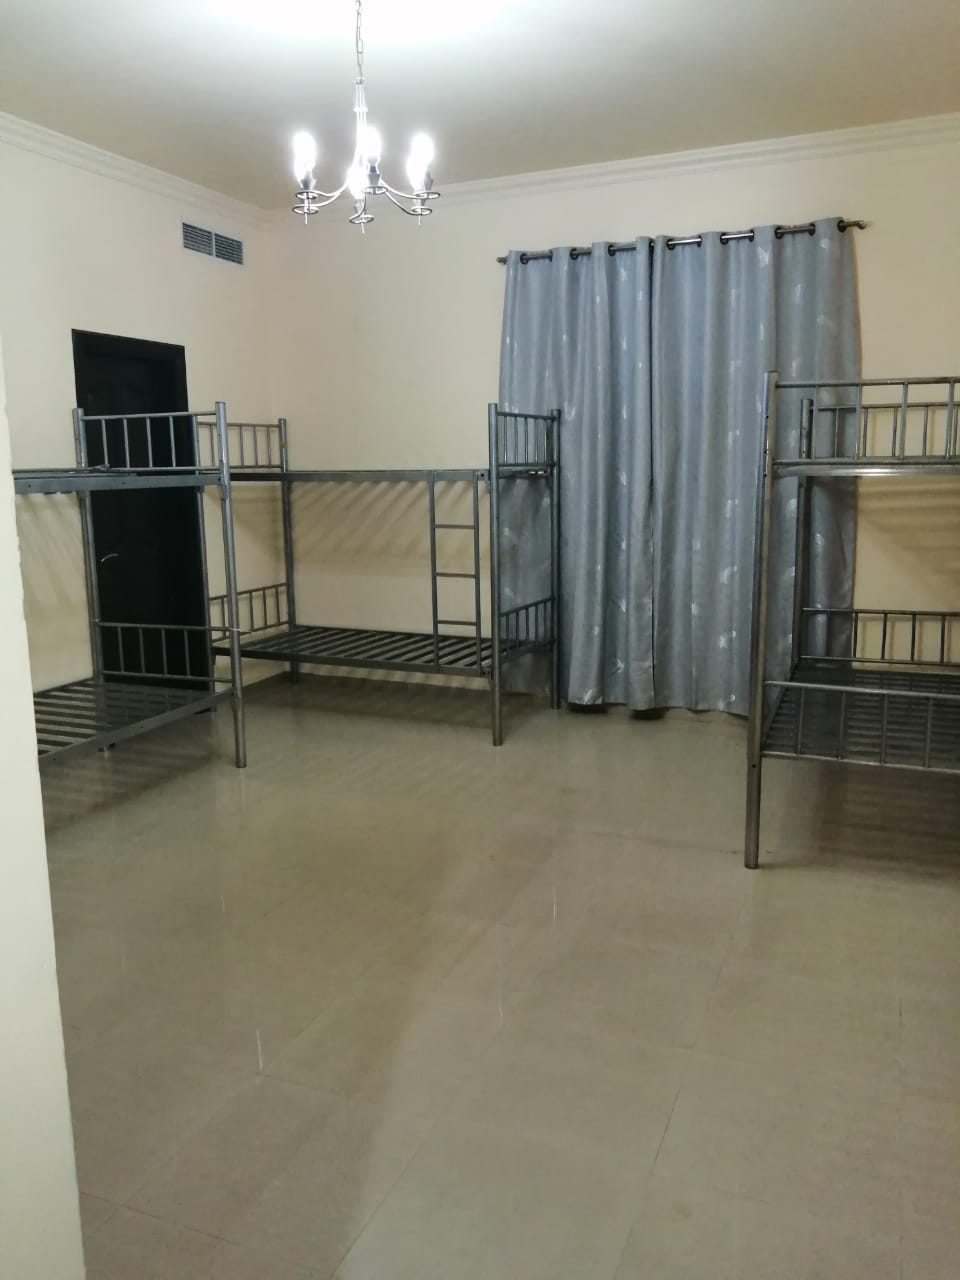 Master Rooms in Bur Dubai For Bachelors Accommodation for 6 Persons Only @3500 Inclusive All, C/Ac, Gas, Dewa, Wifi